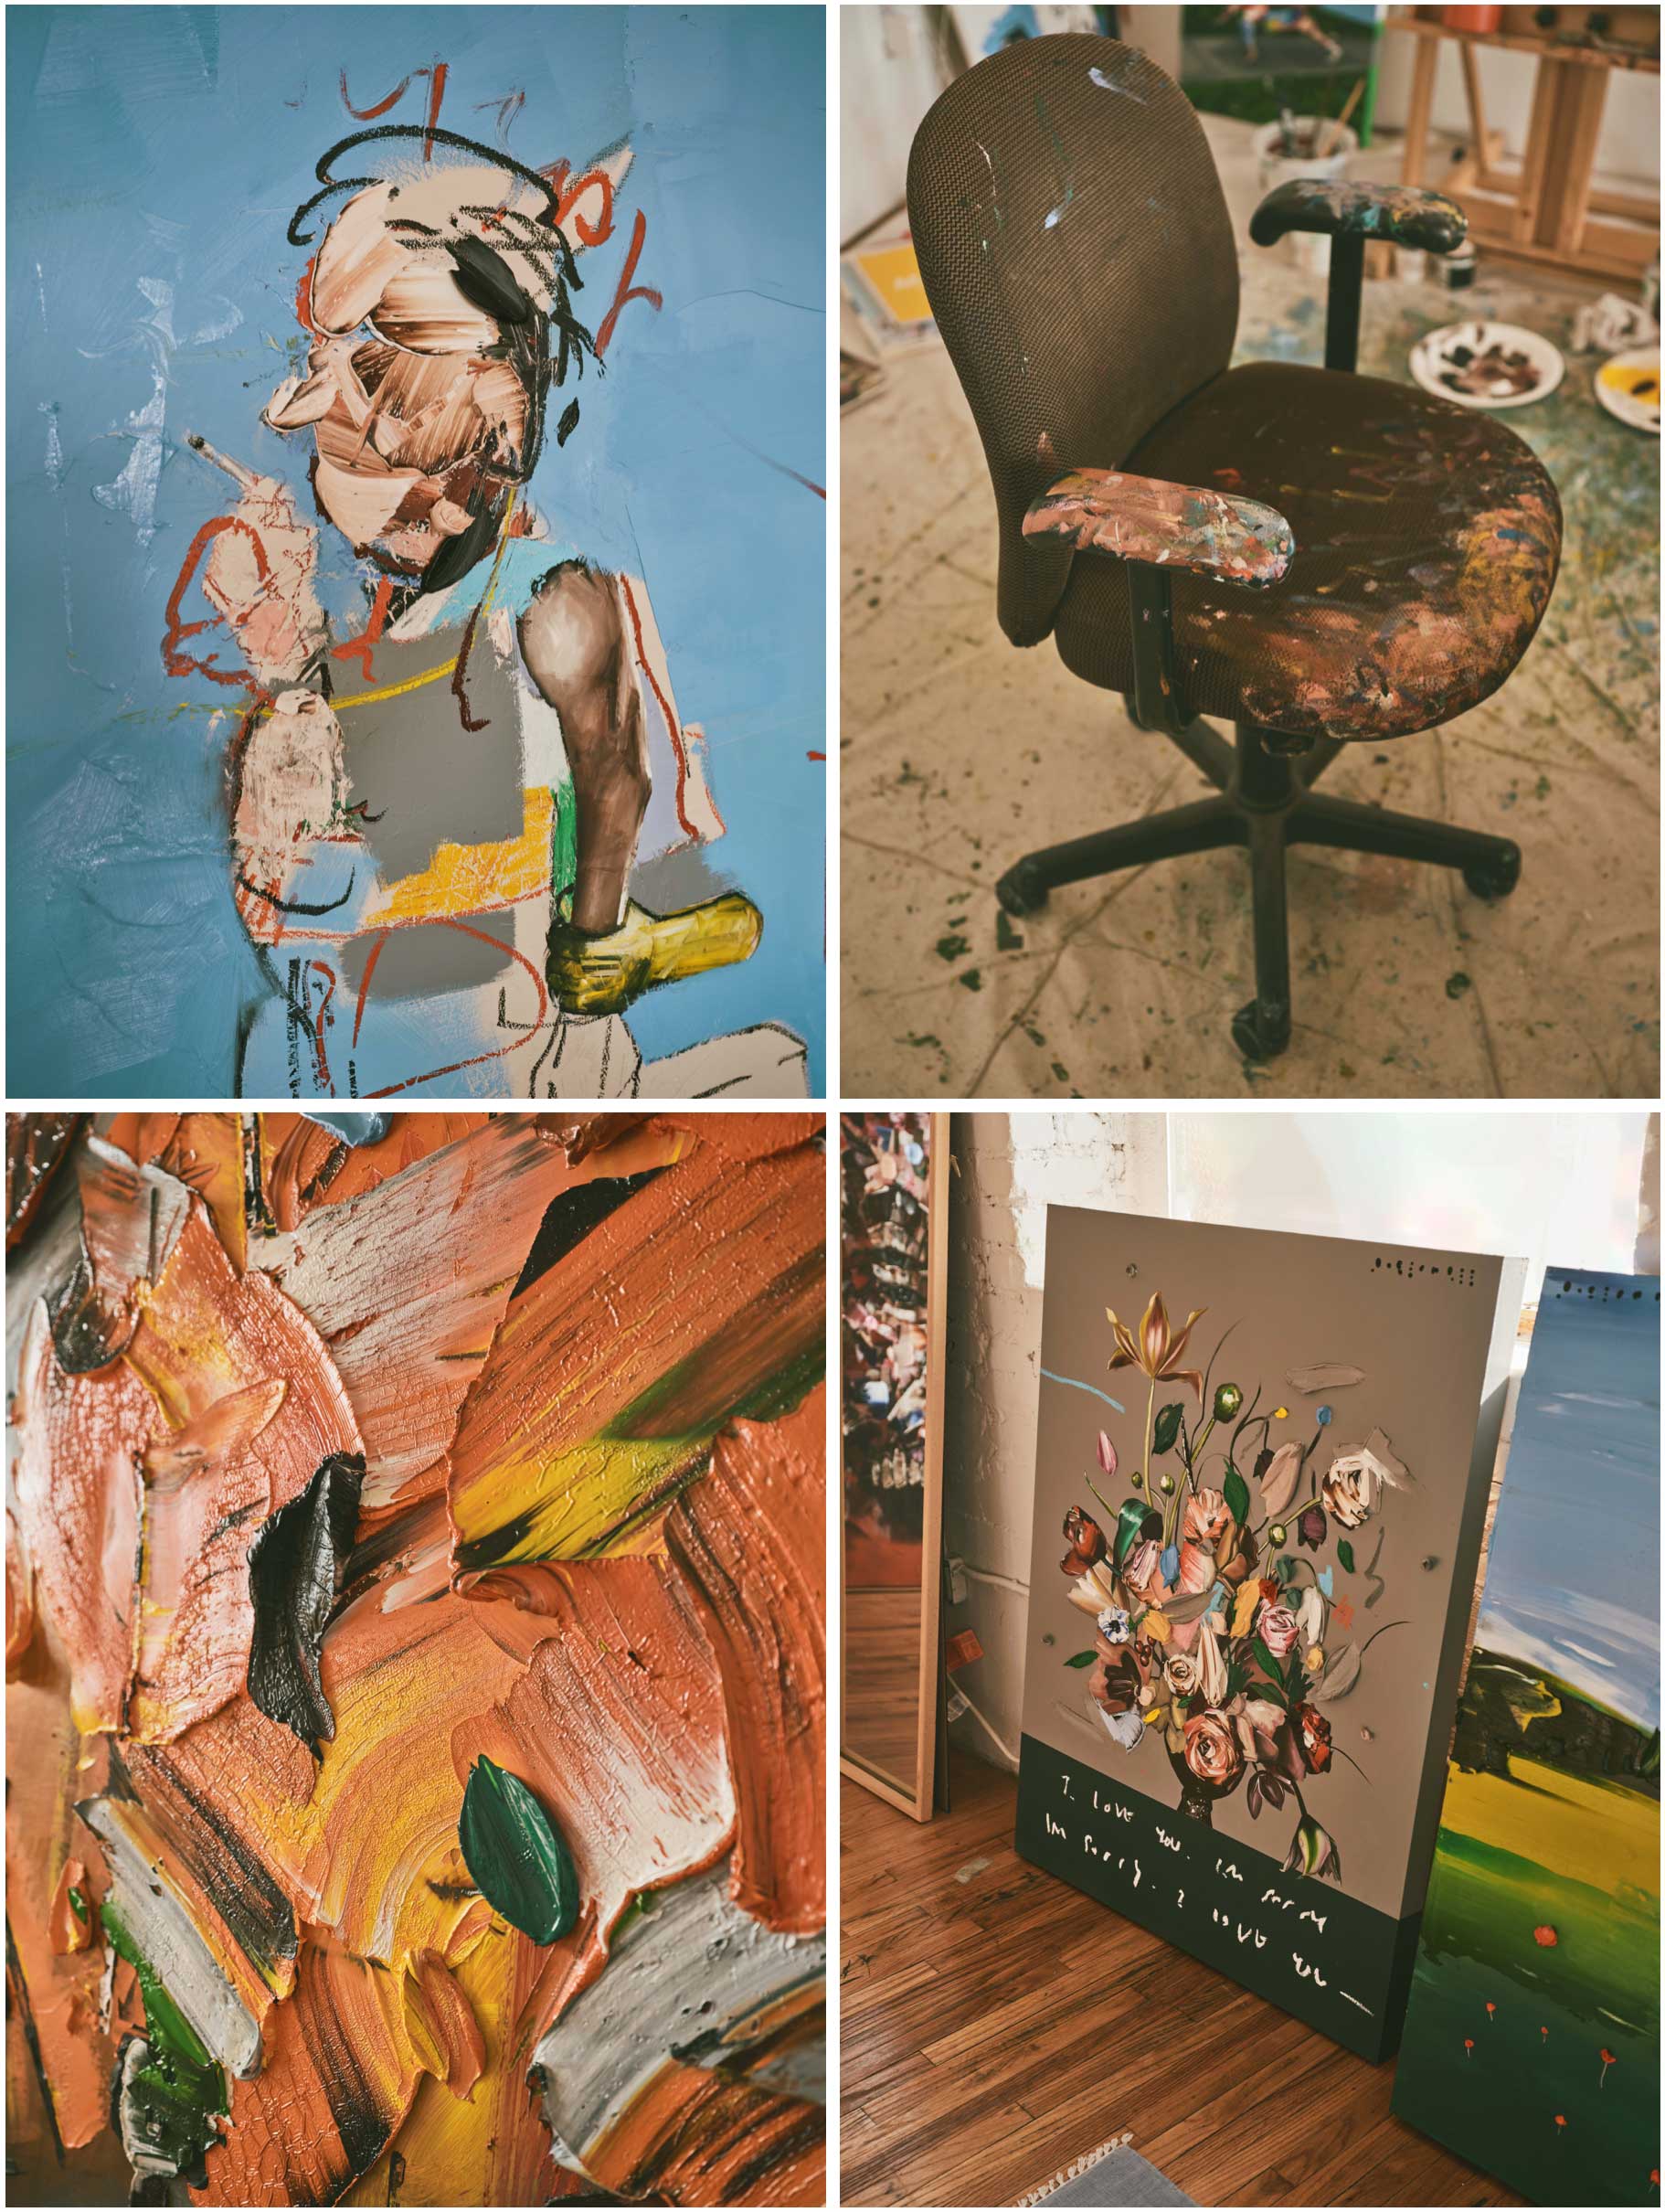 CLOCKWISE FROM TOP LEFT: A work in progress; Joseph’s studio; 'Same Differences'; paint detail.